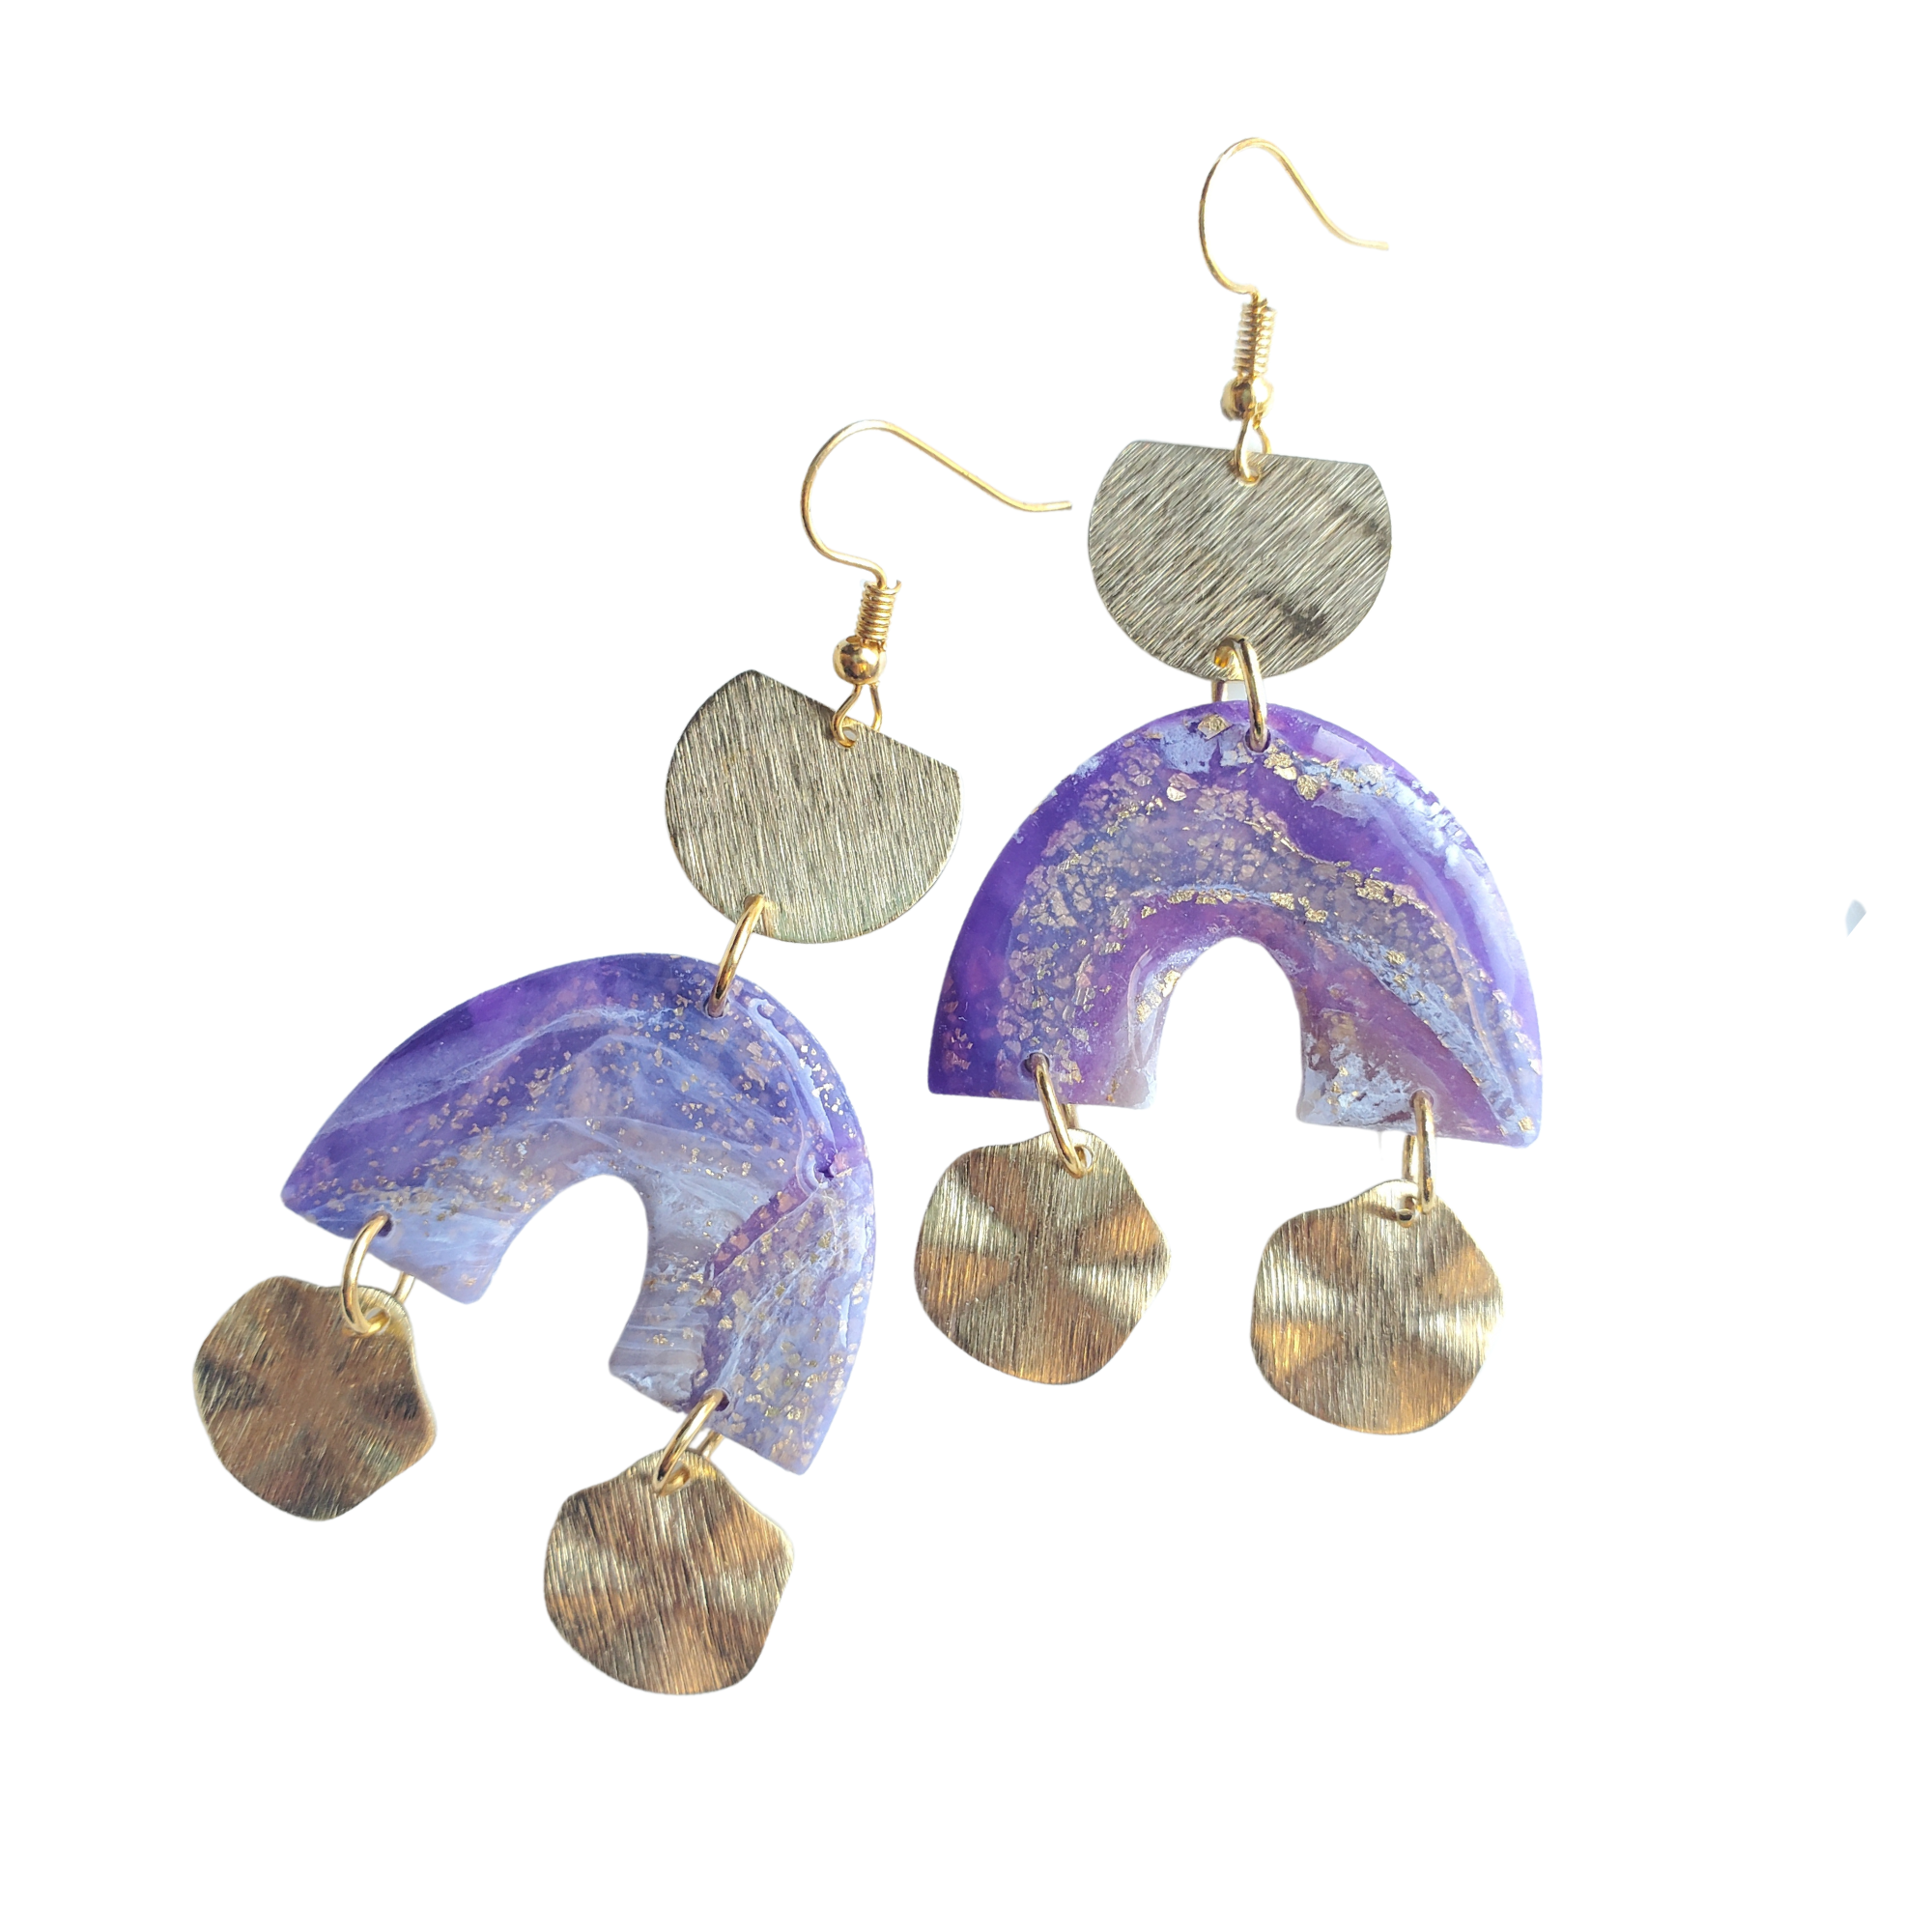 Agate Inspired Statement Earrings - Violet Arches (3 styles)